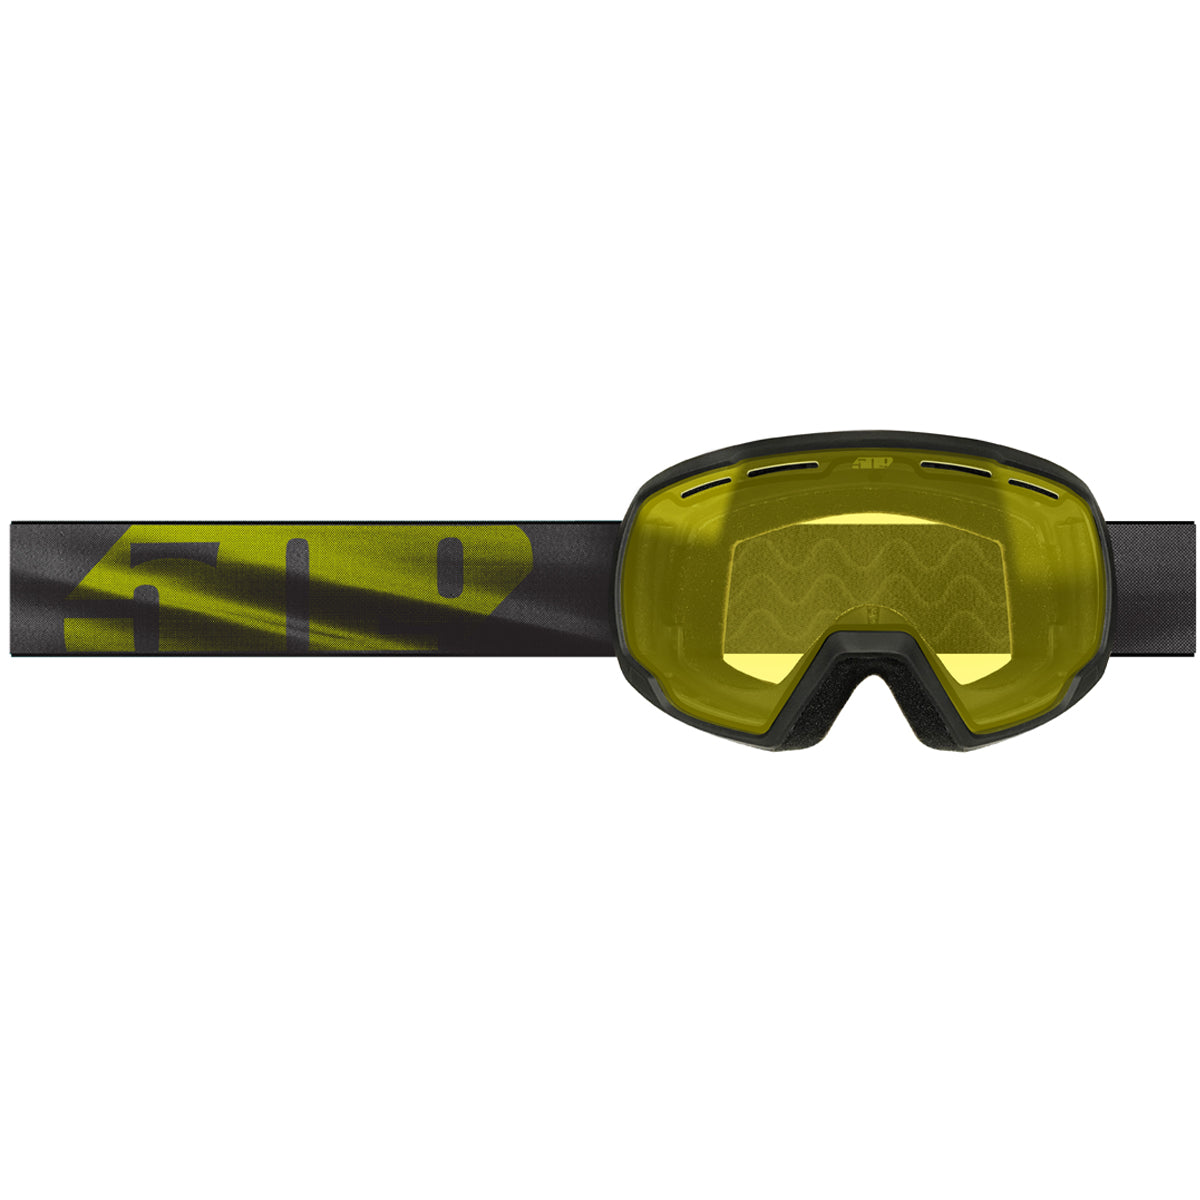 509 Ripper 2.0 Youth Goggle - F02002201 - The Parts Lodge